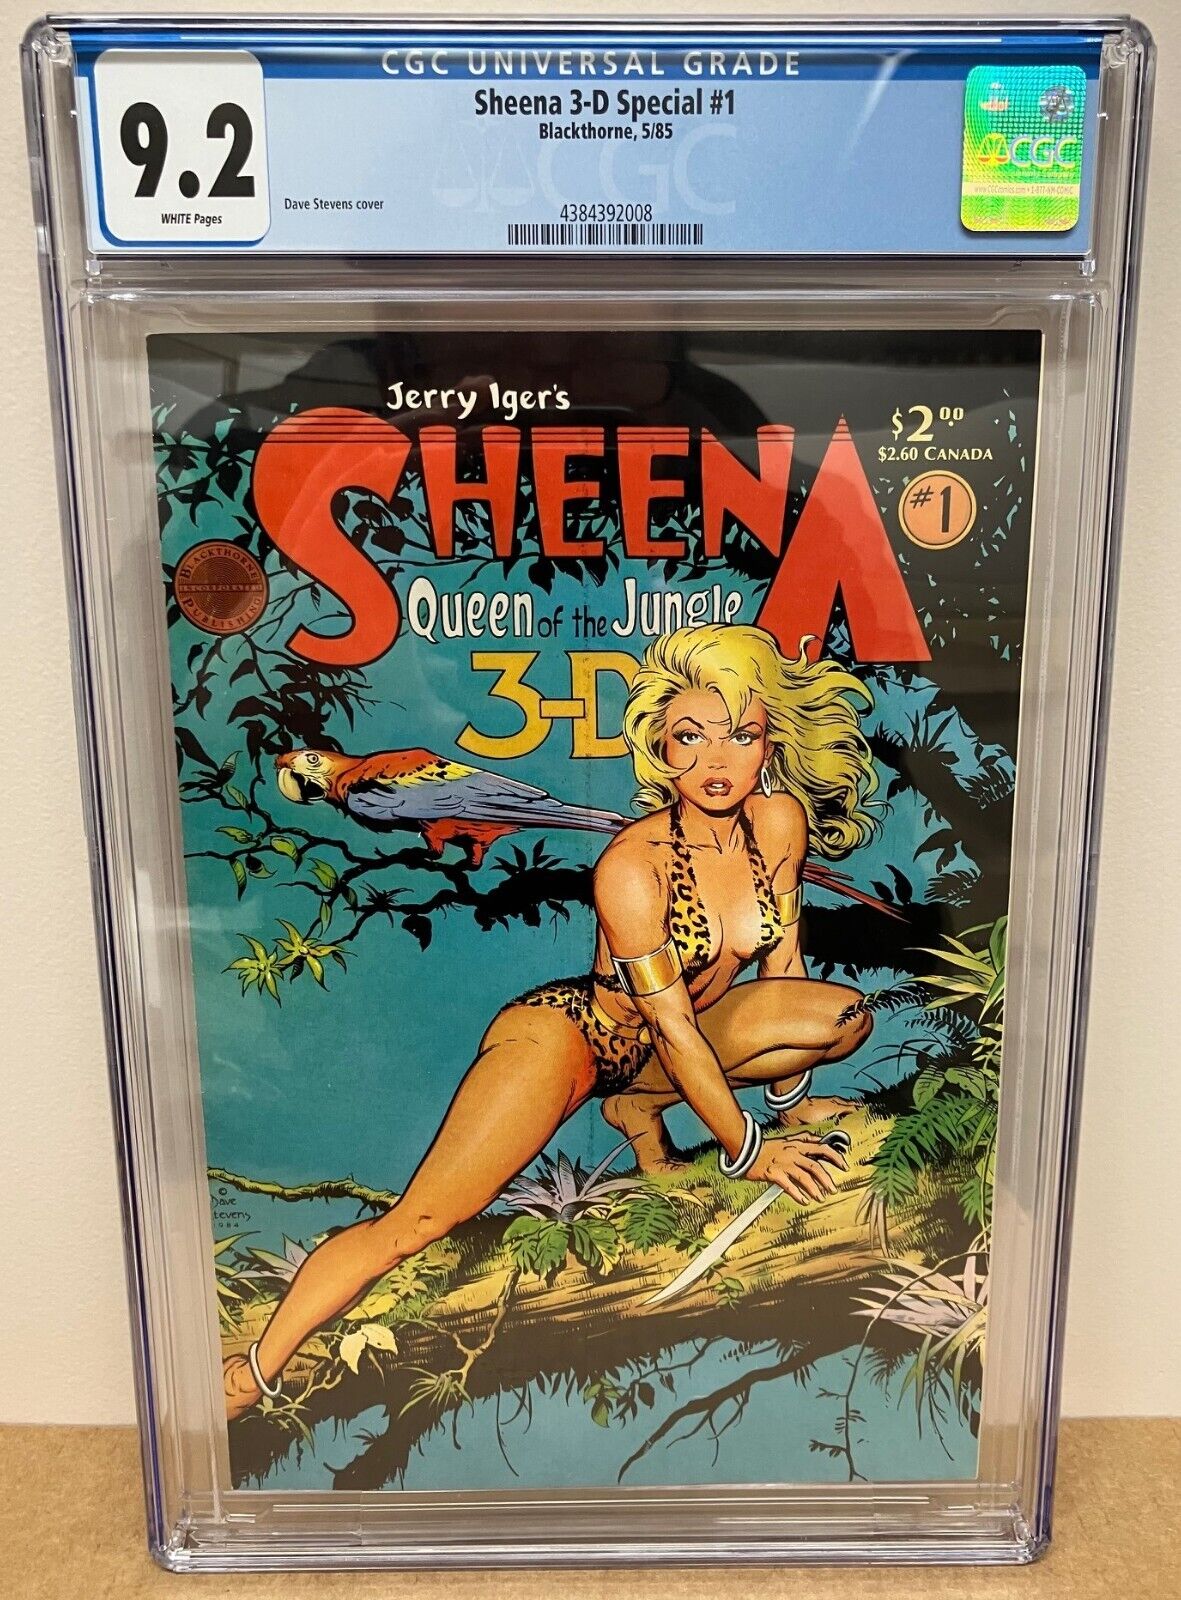 Sheena 3-D Special #1 CGC 9.2 White pages Blackthorne Dave Stevens art